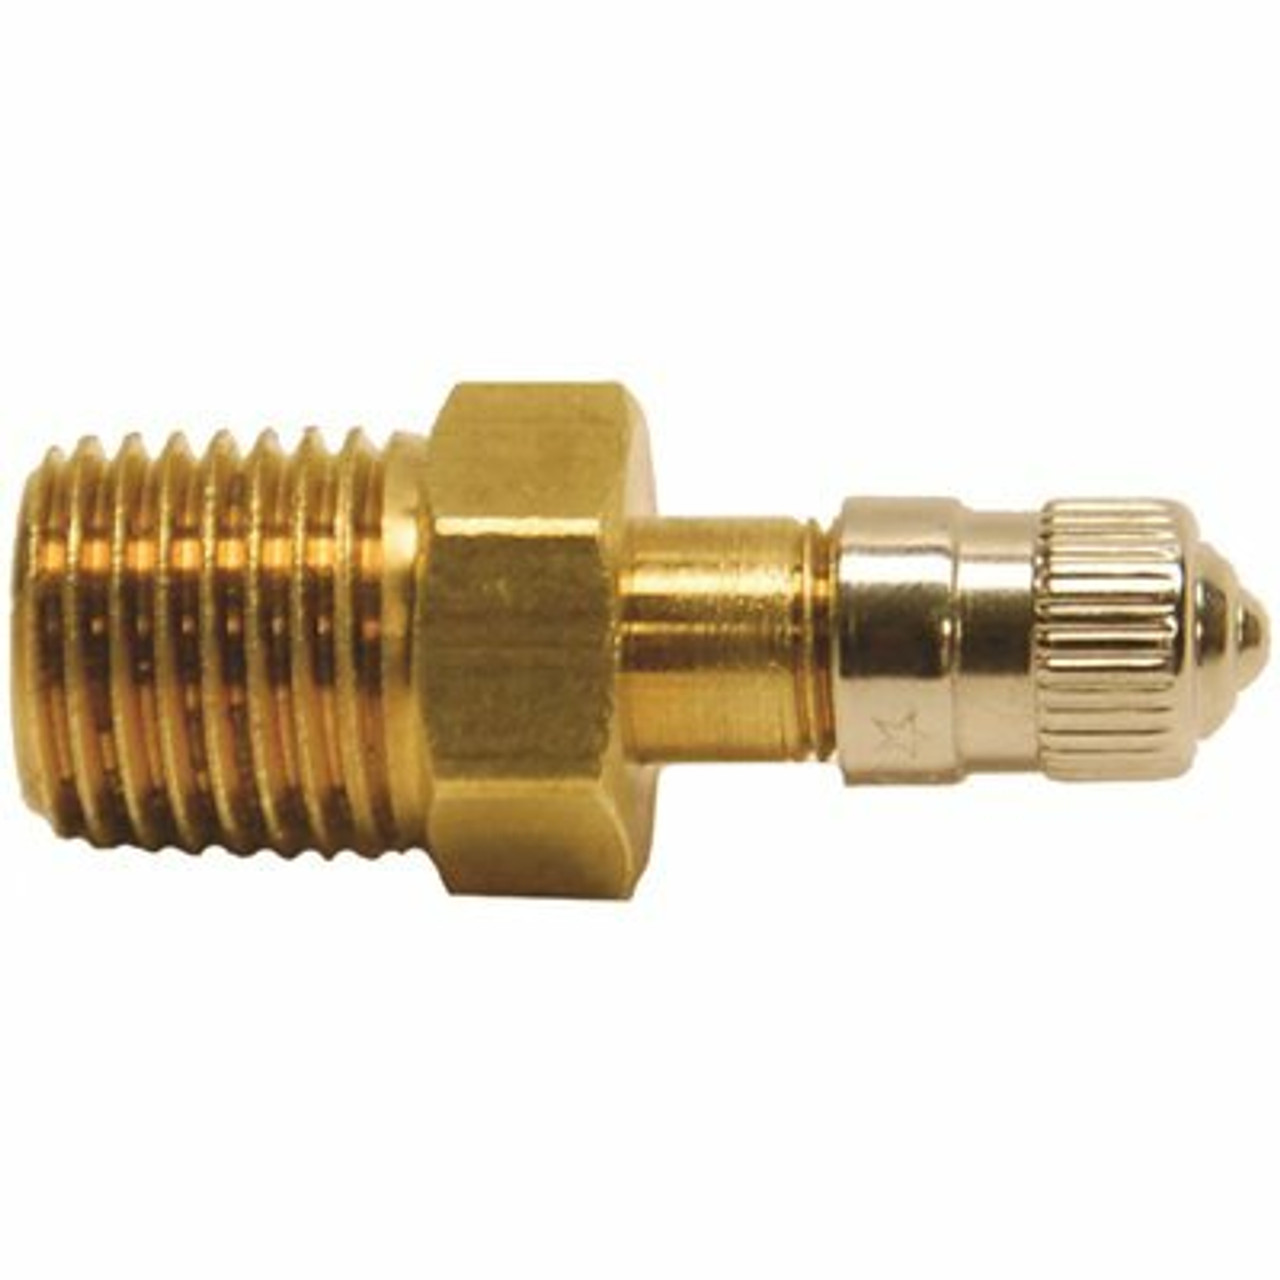 Mec Standard Pressure Test Tap Valve With Brass Cap And Everseal, 1/4 In. Mnpt